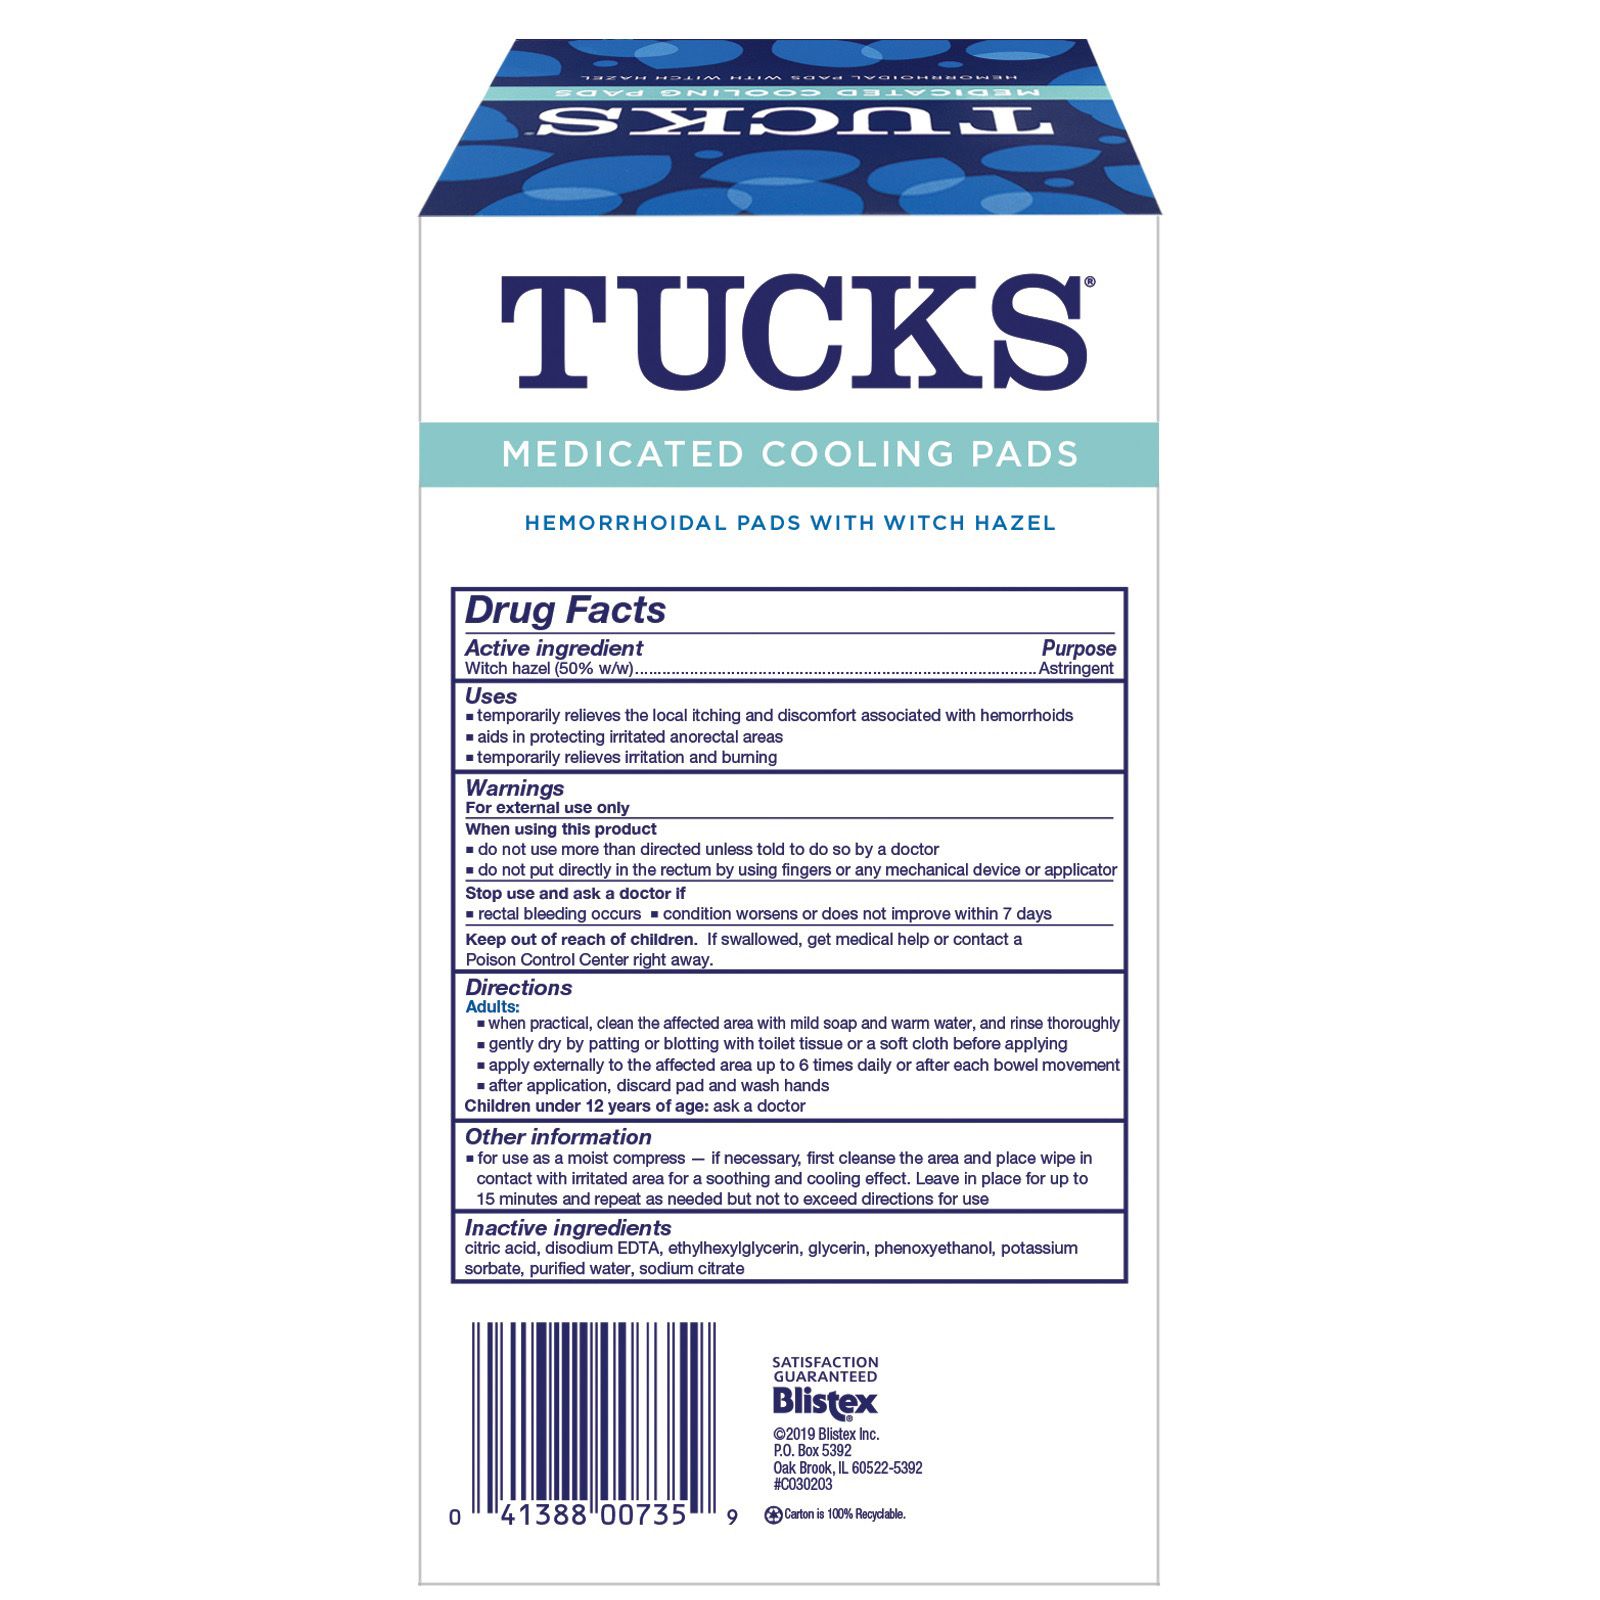 Tucks Medicated Cooling Pads, 40 ct Ingredients and Reviews